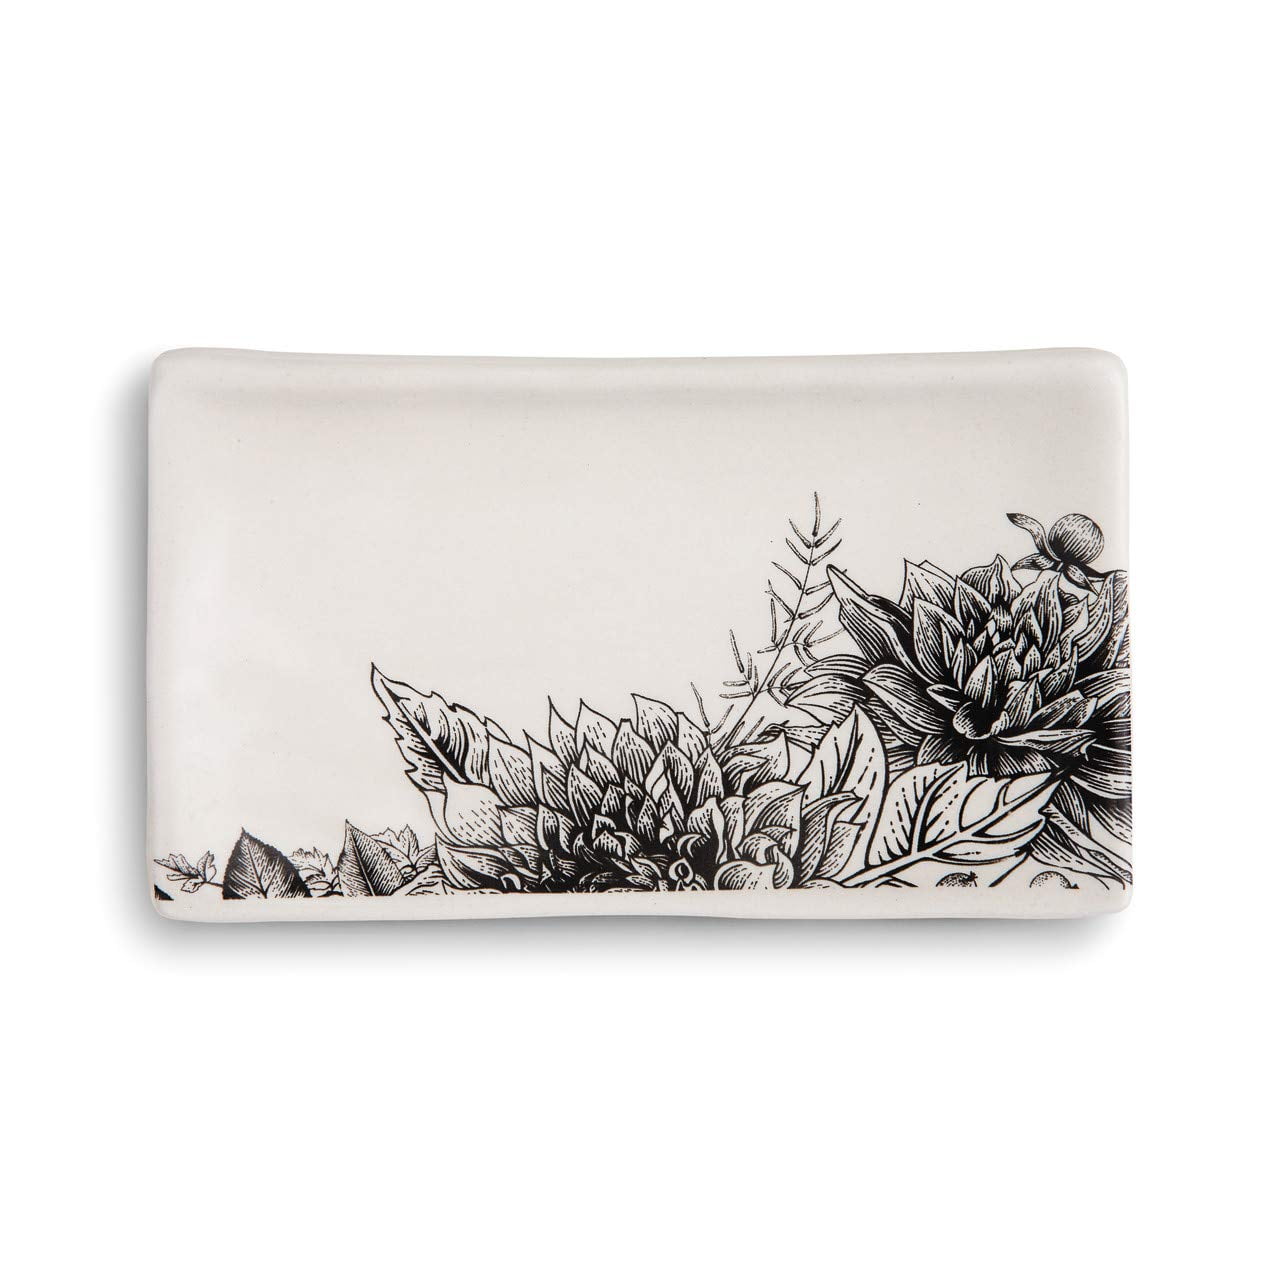 Demdaco at Home Among The Trees Blue 6 x 3.5 Stoneware Everyday Kitchen Rectangle Spoon Rest